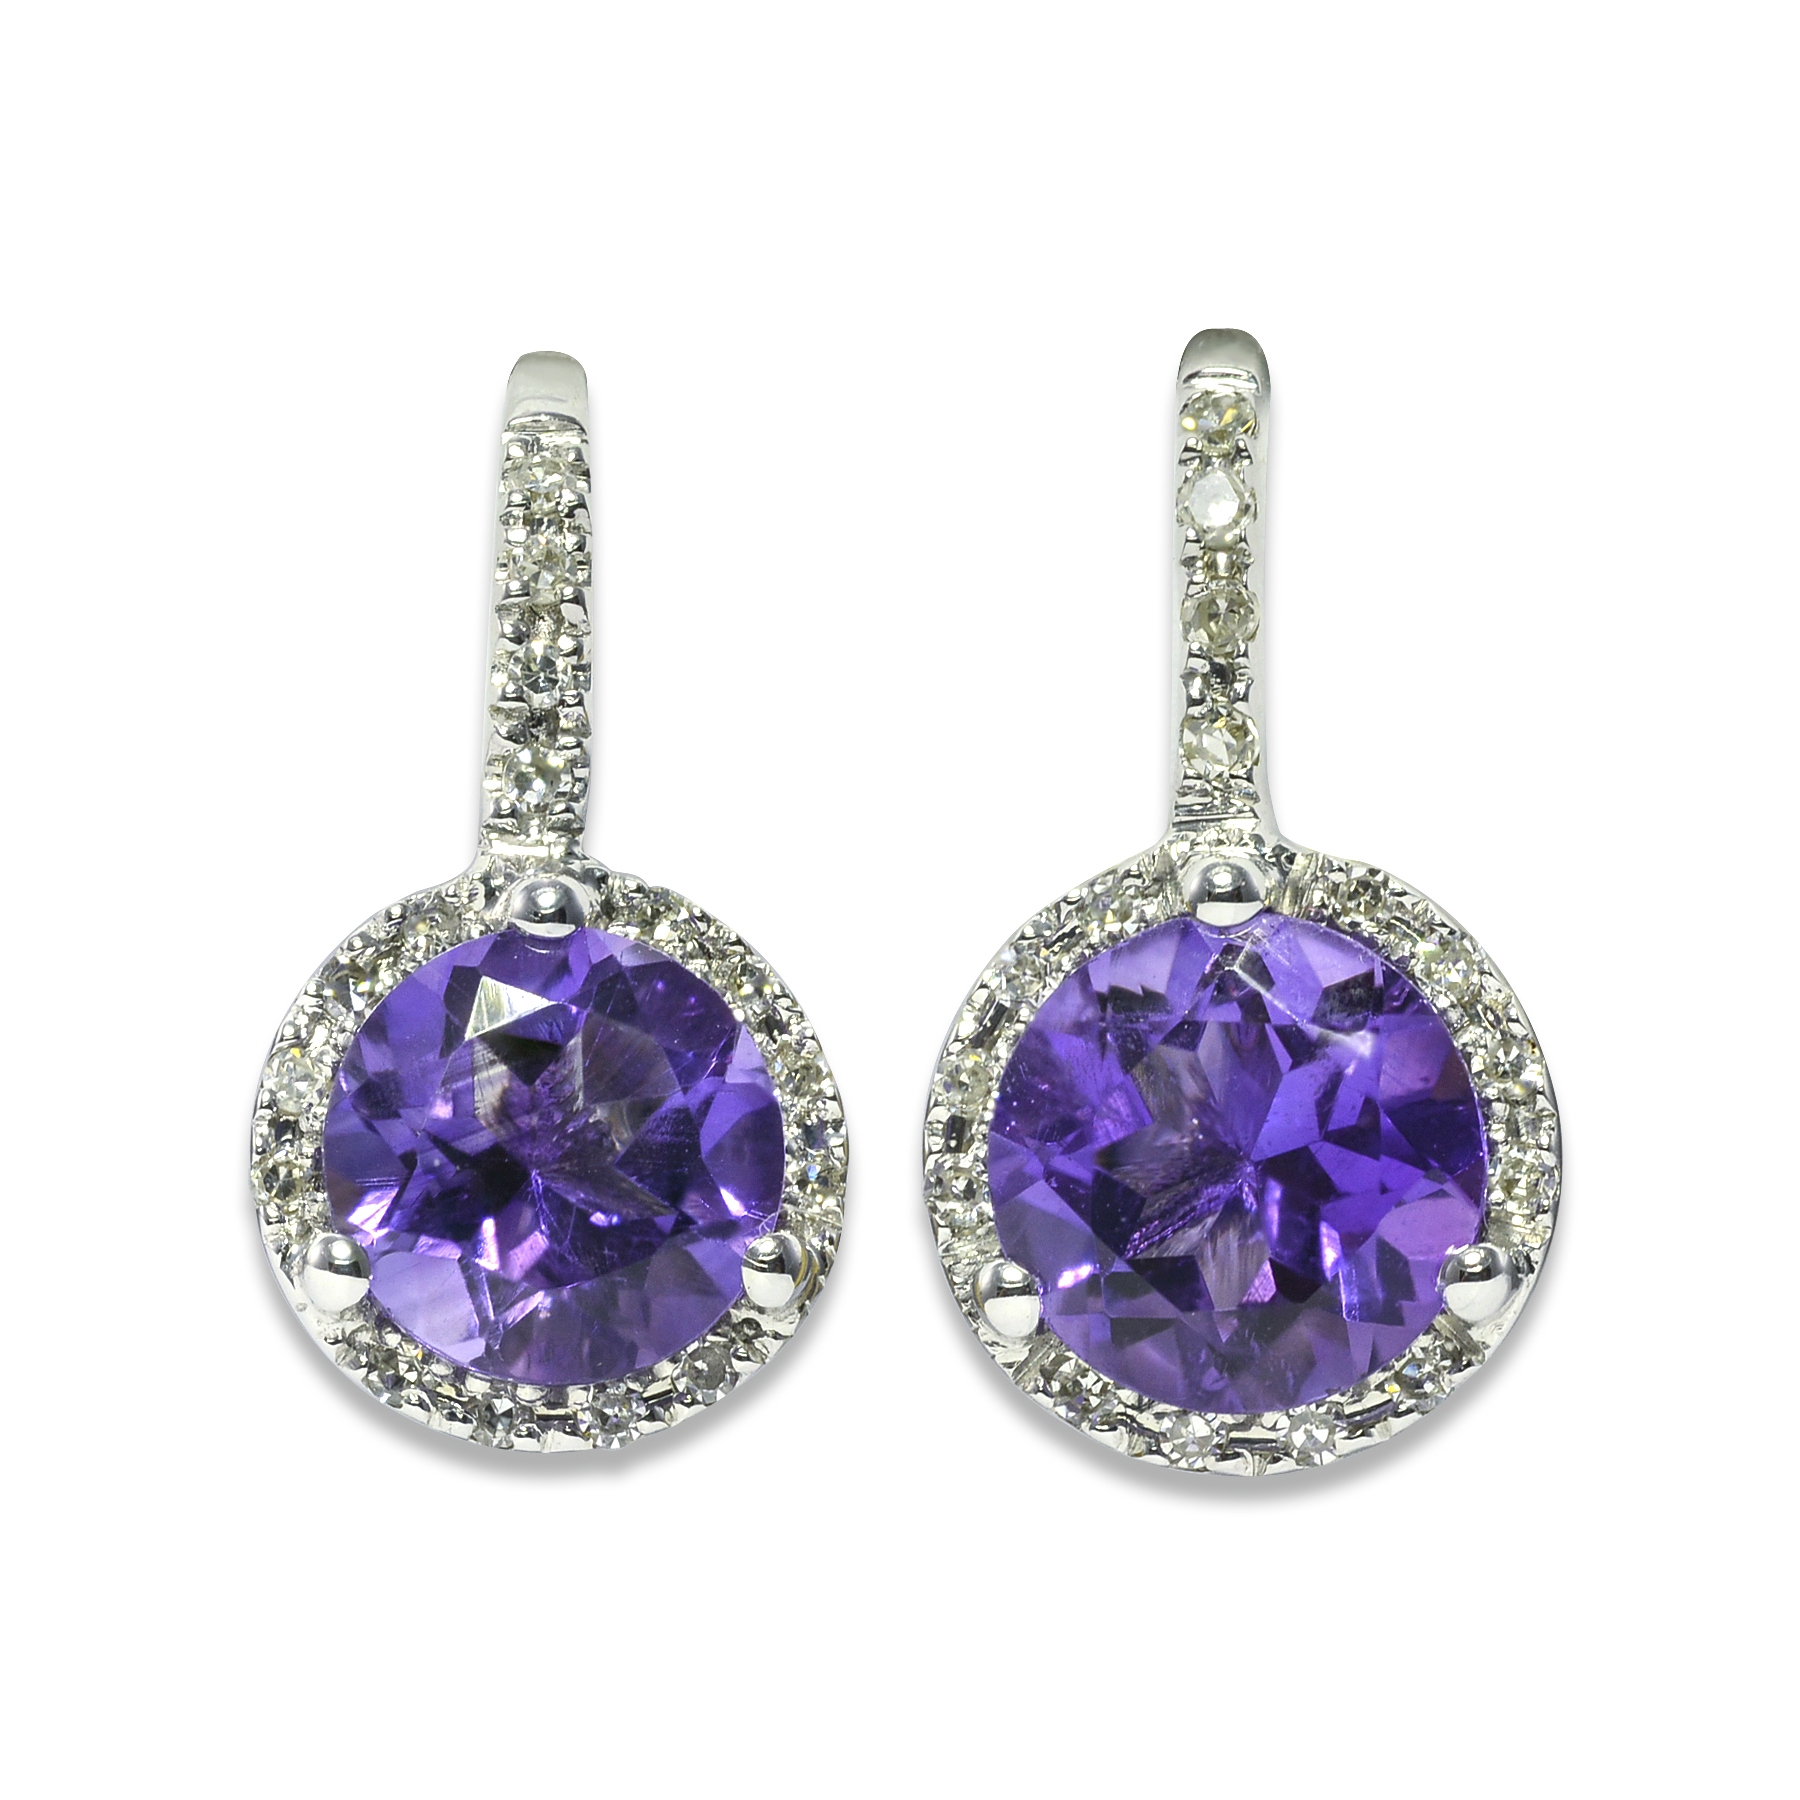 1.50 Carat TW Amethyst and Diamond Earrings in Yellow Gold